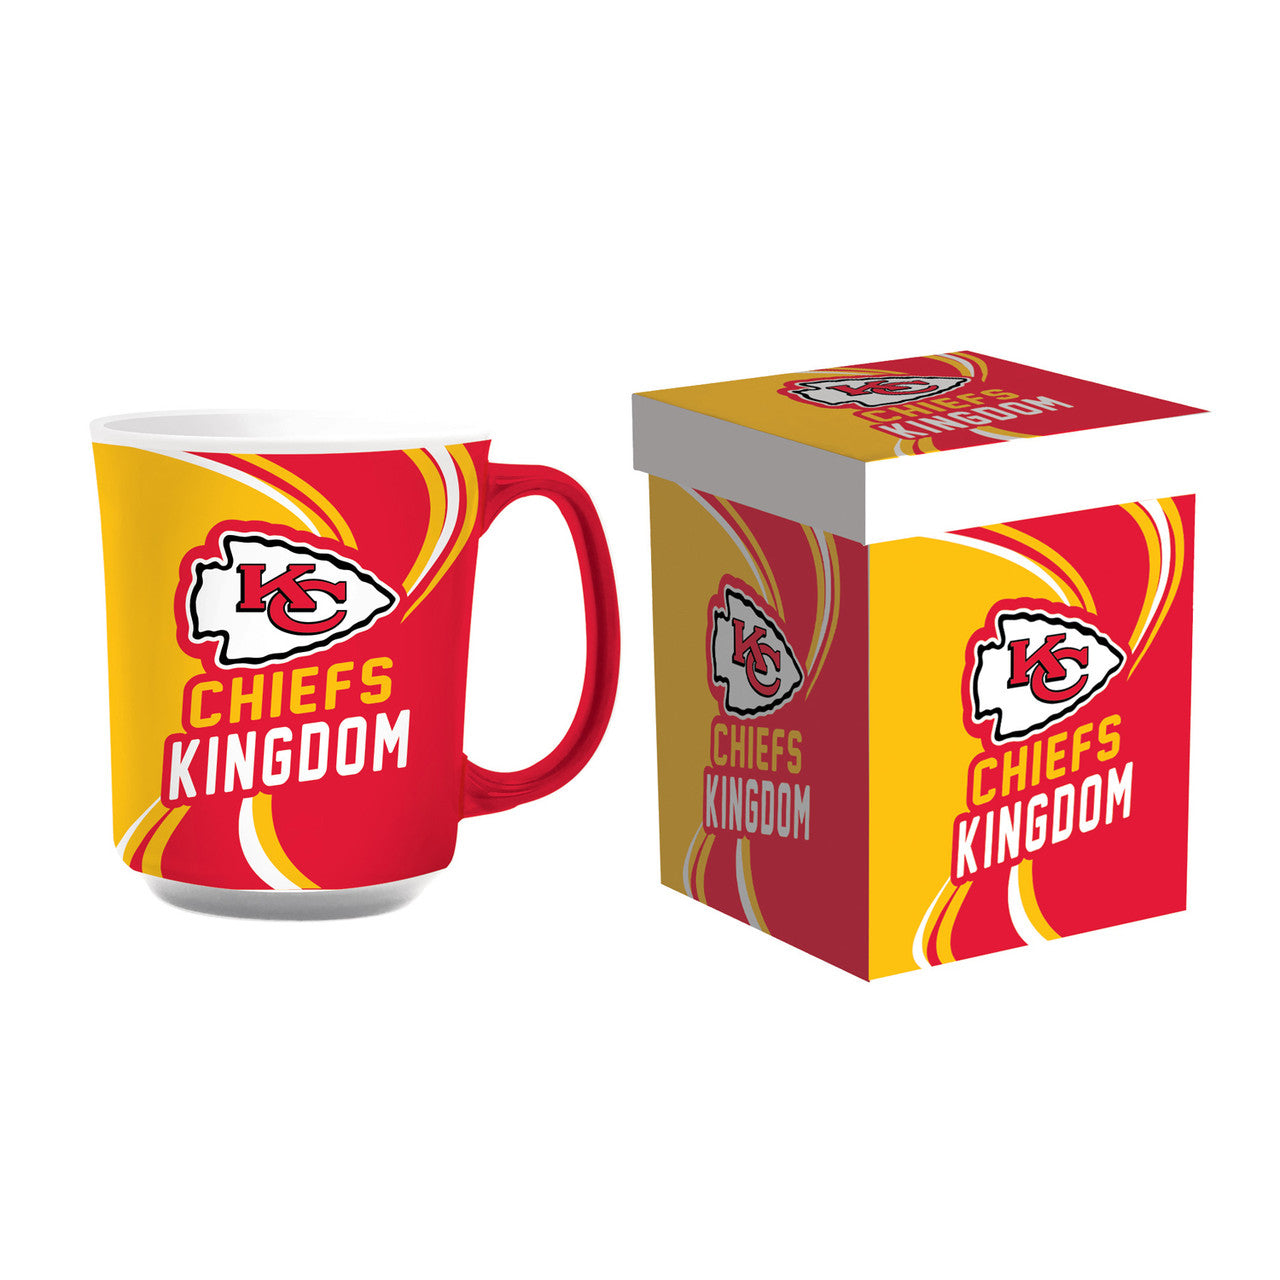 Chiefs 14oz Coffee Mug by Evergreen. Team colors, logo, microwave-safe. Officially licensed NFL gear.